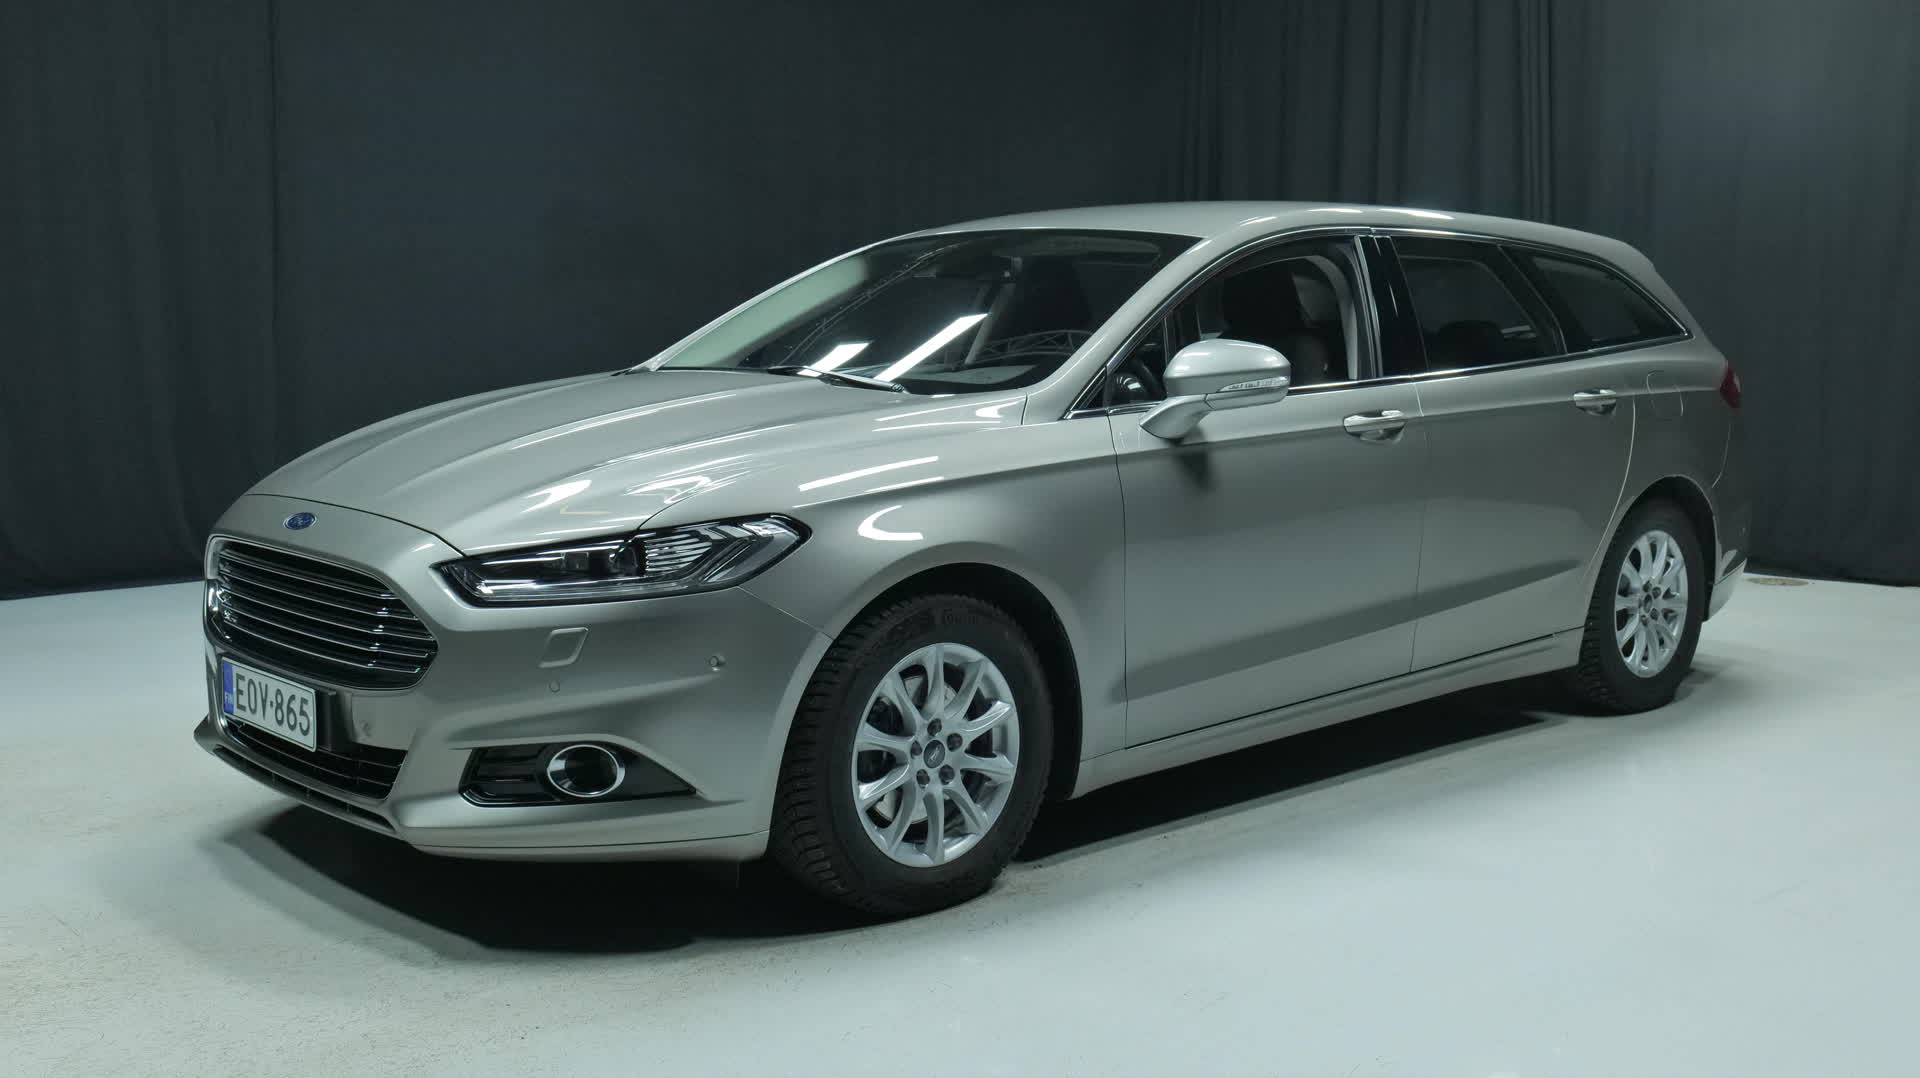 Ford Mondeo EOV-865